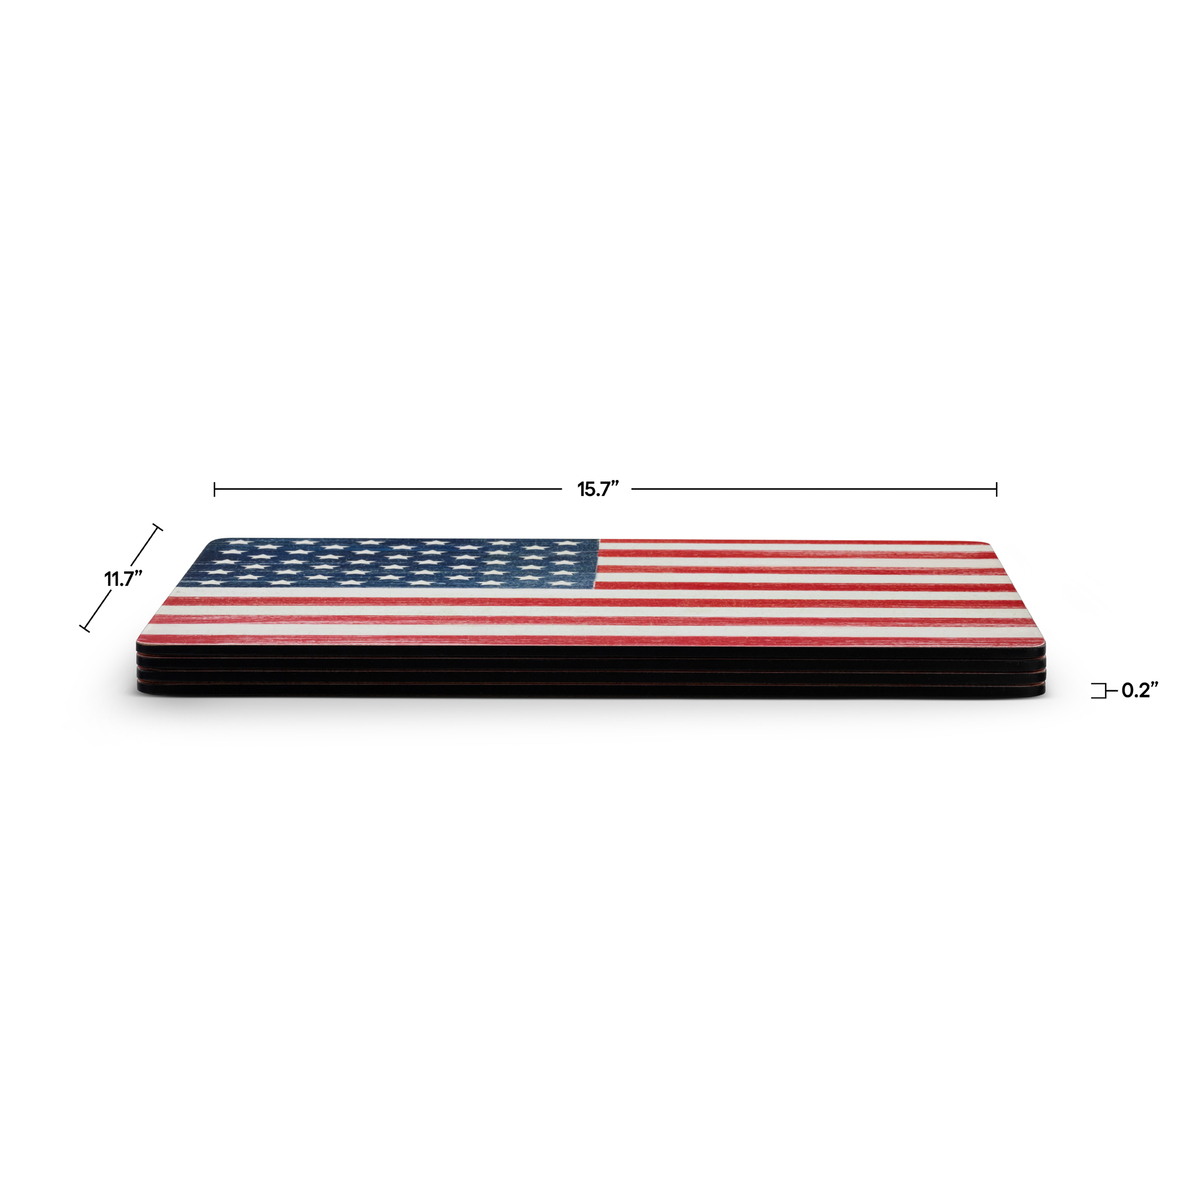 Pimpernel American Flag Placemats Set of 4 image number null